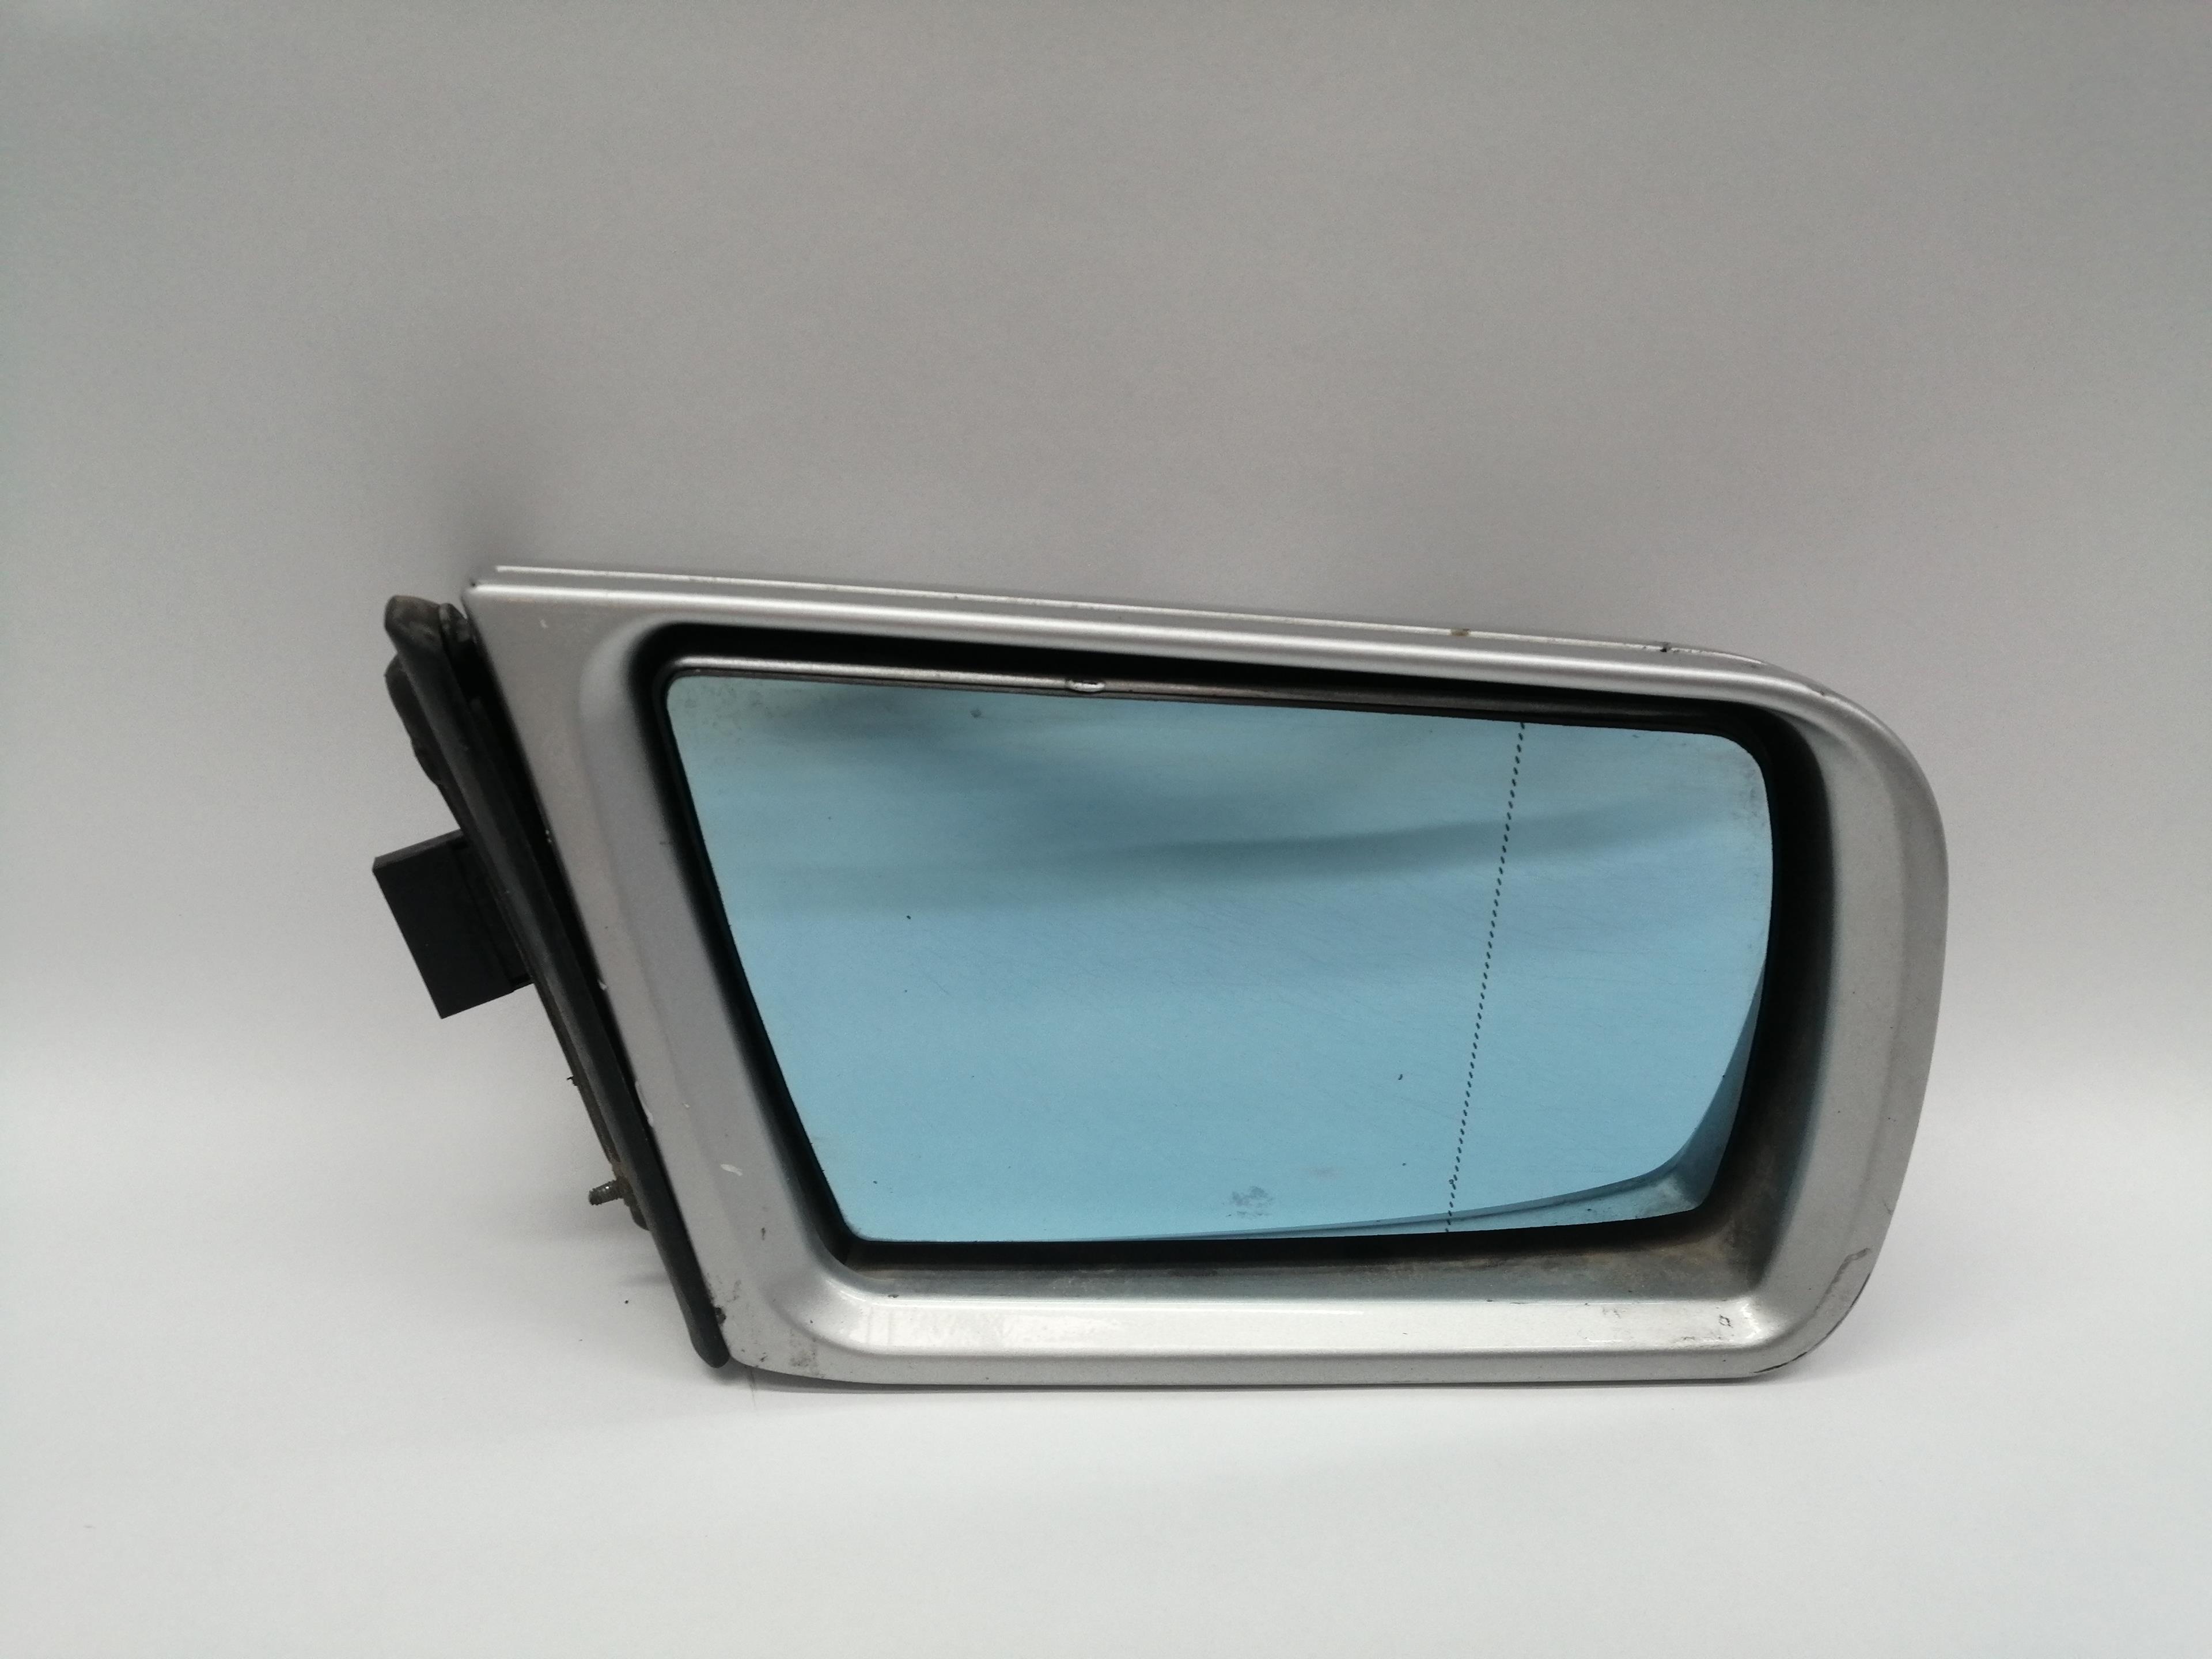 MERCEDES-BENZ E-Class W210 (1995-2002) Right Side Wing Mirror 2028110298 21779443